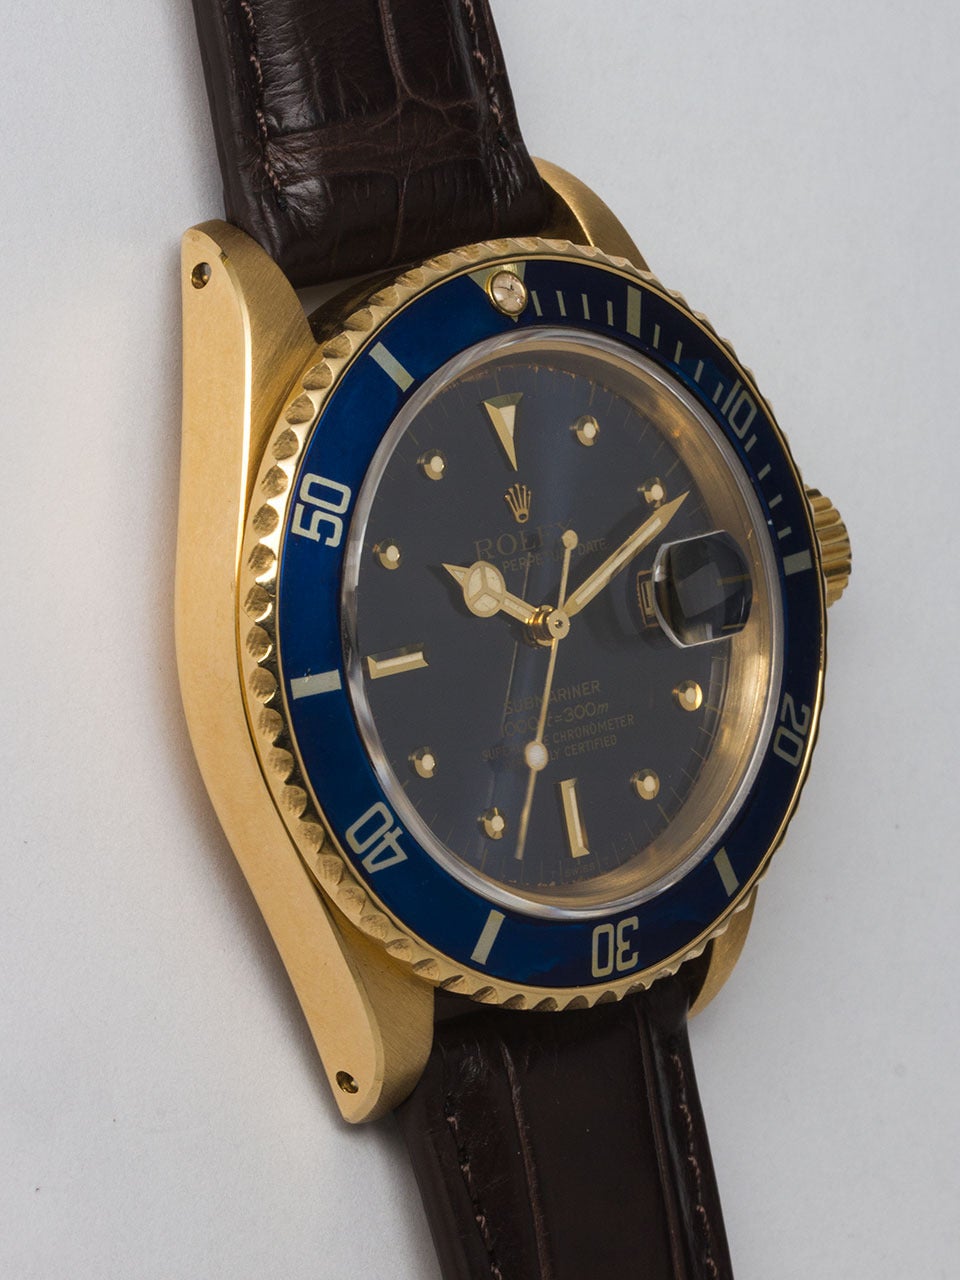 Rolex 18K Yellow Gold Submariner Wristwatch ref 16808, serial #6.4 million circa 1979. 40mm diameter case with unidirectional elapsed time bezel, lightly faded blue insert and sapphire crystal. Original blue so called 